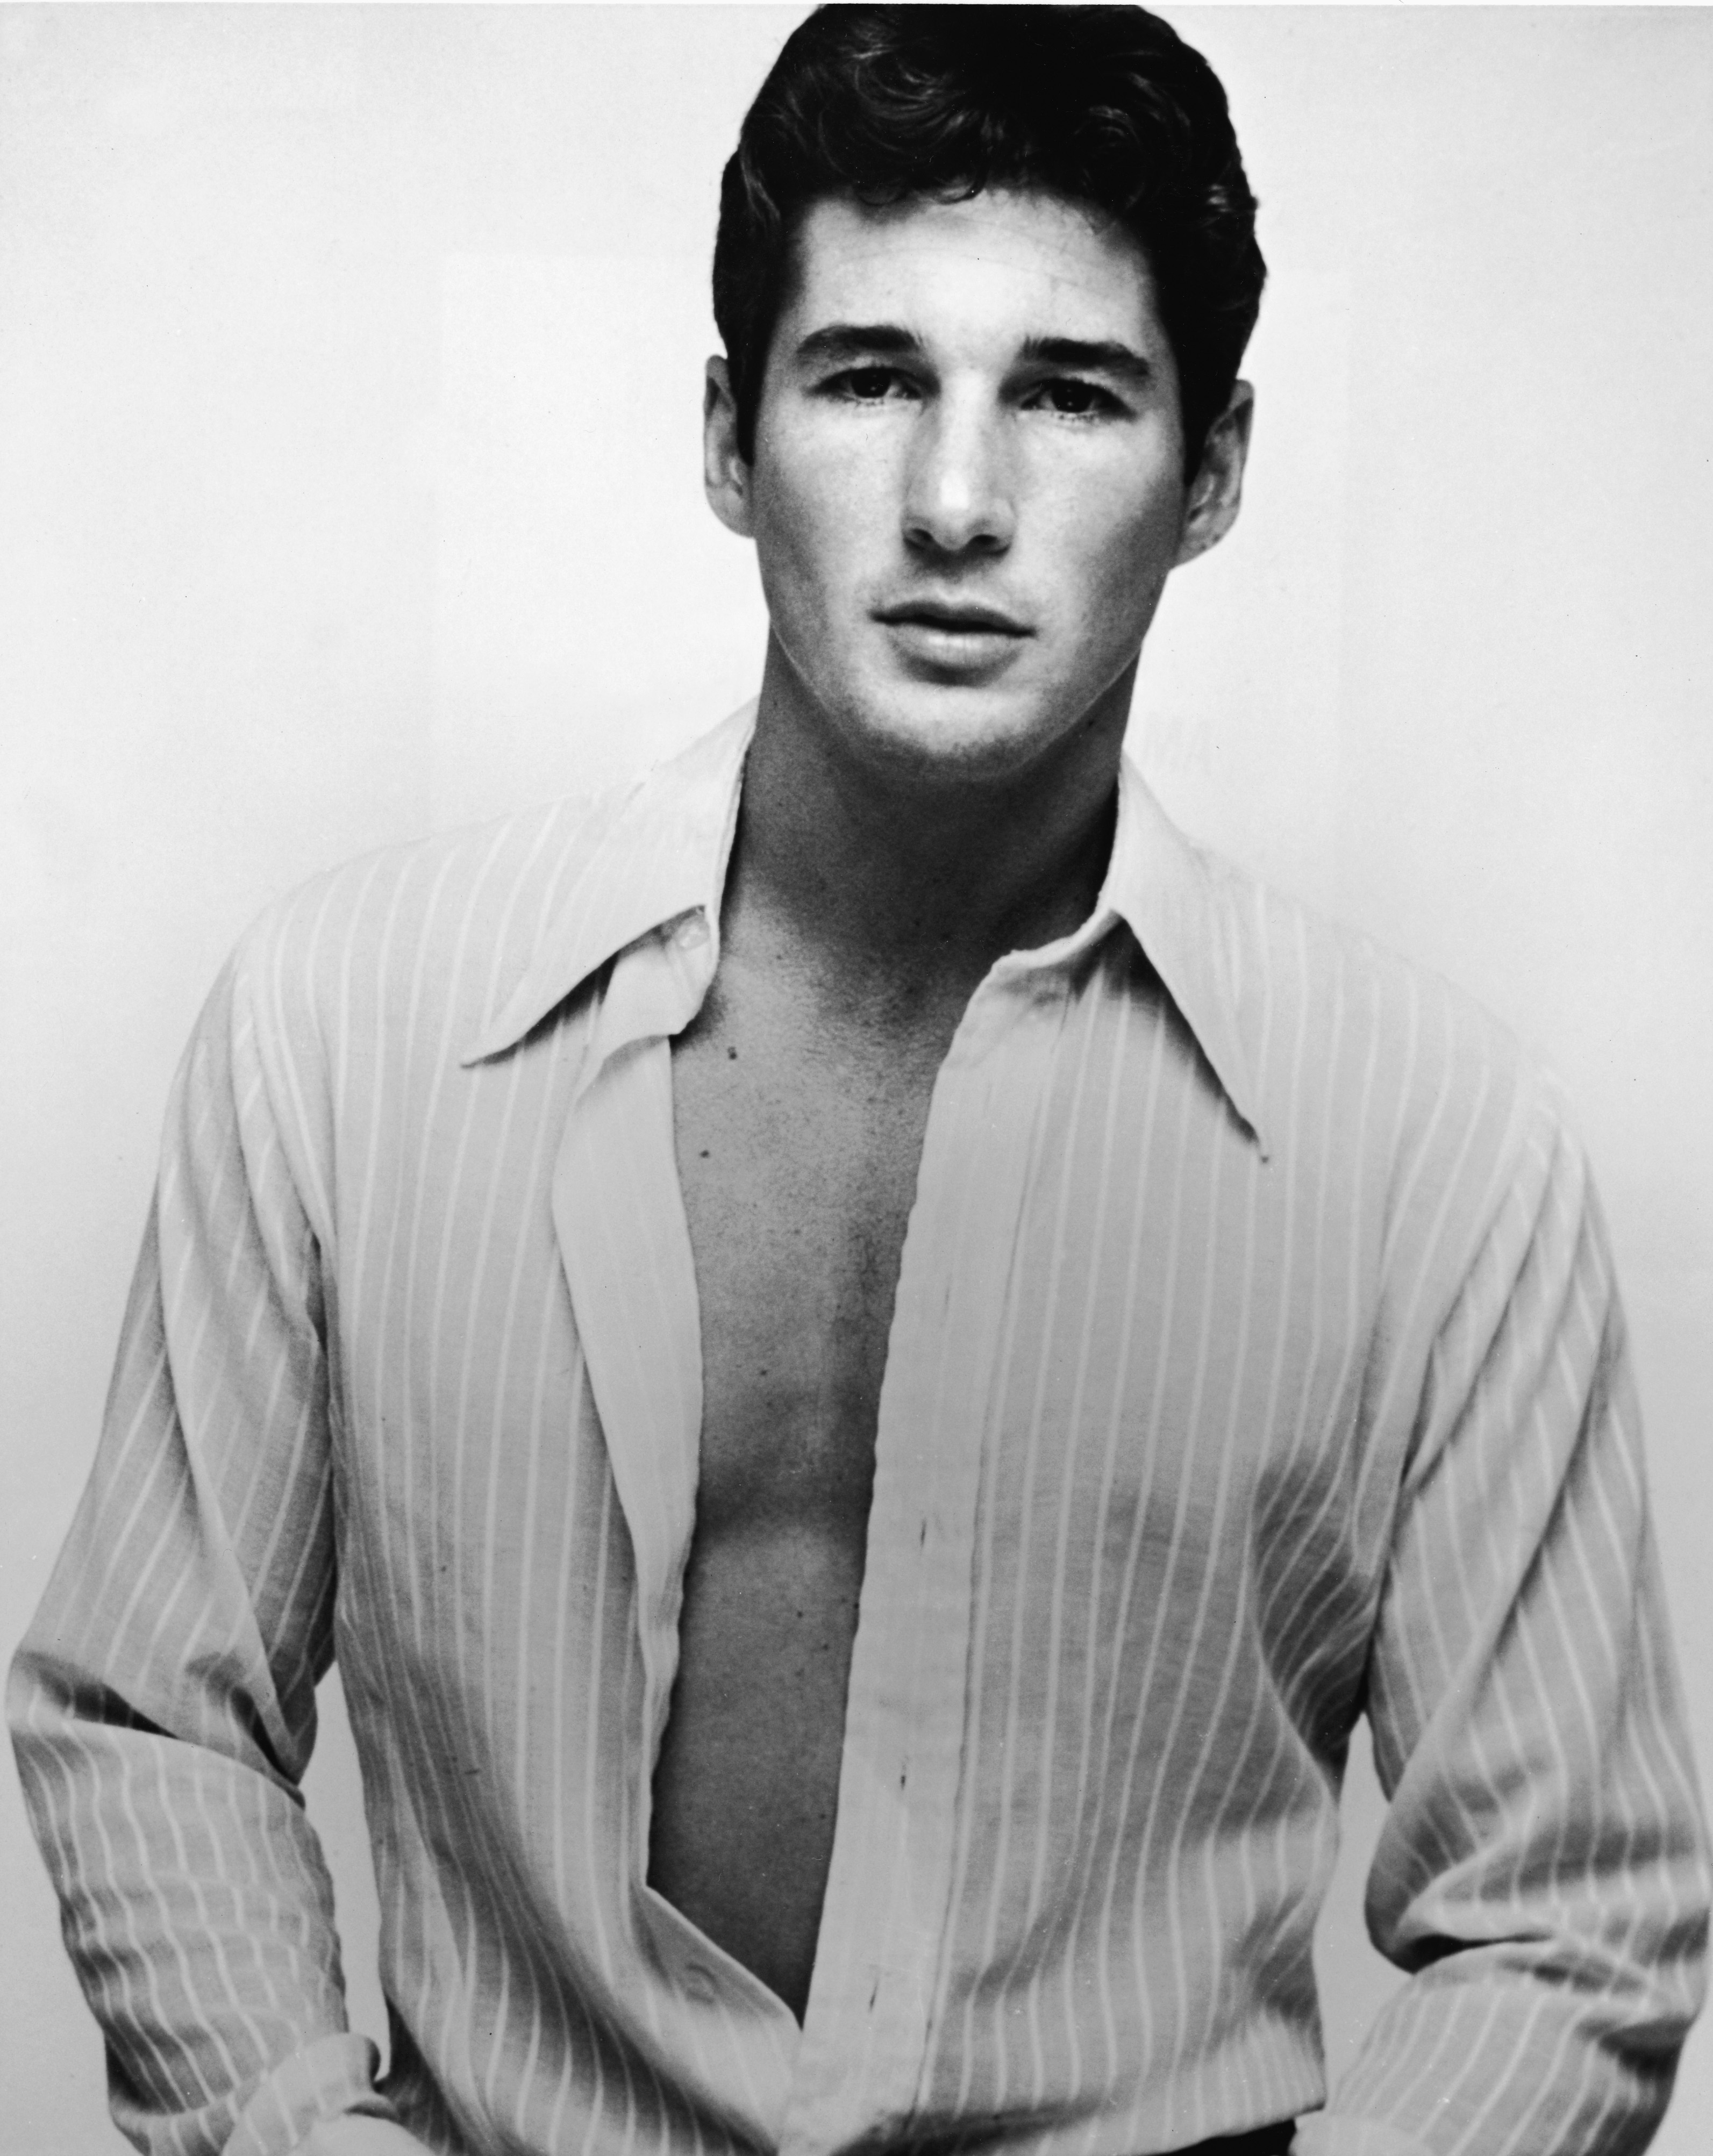 Richard Gere posing in a black and white portrait in the late 1970s | Source: Getty Images